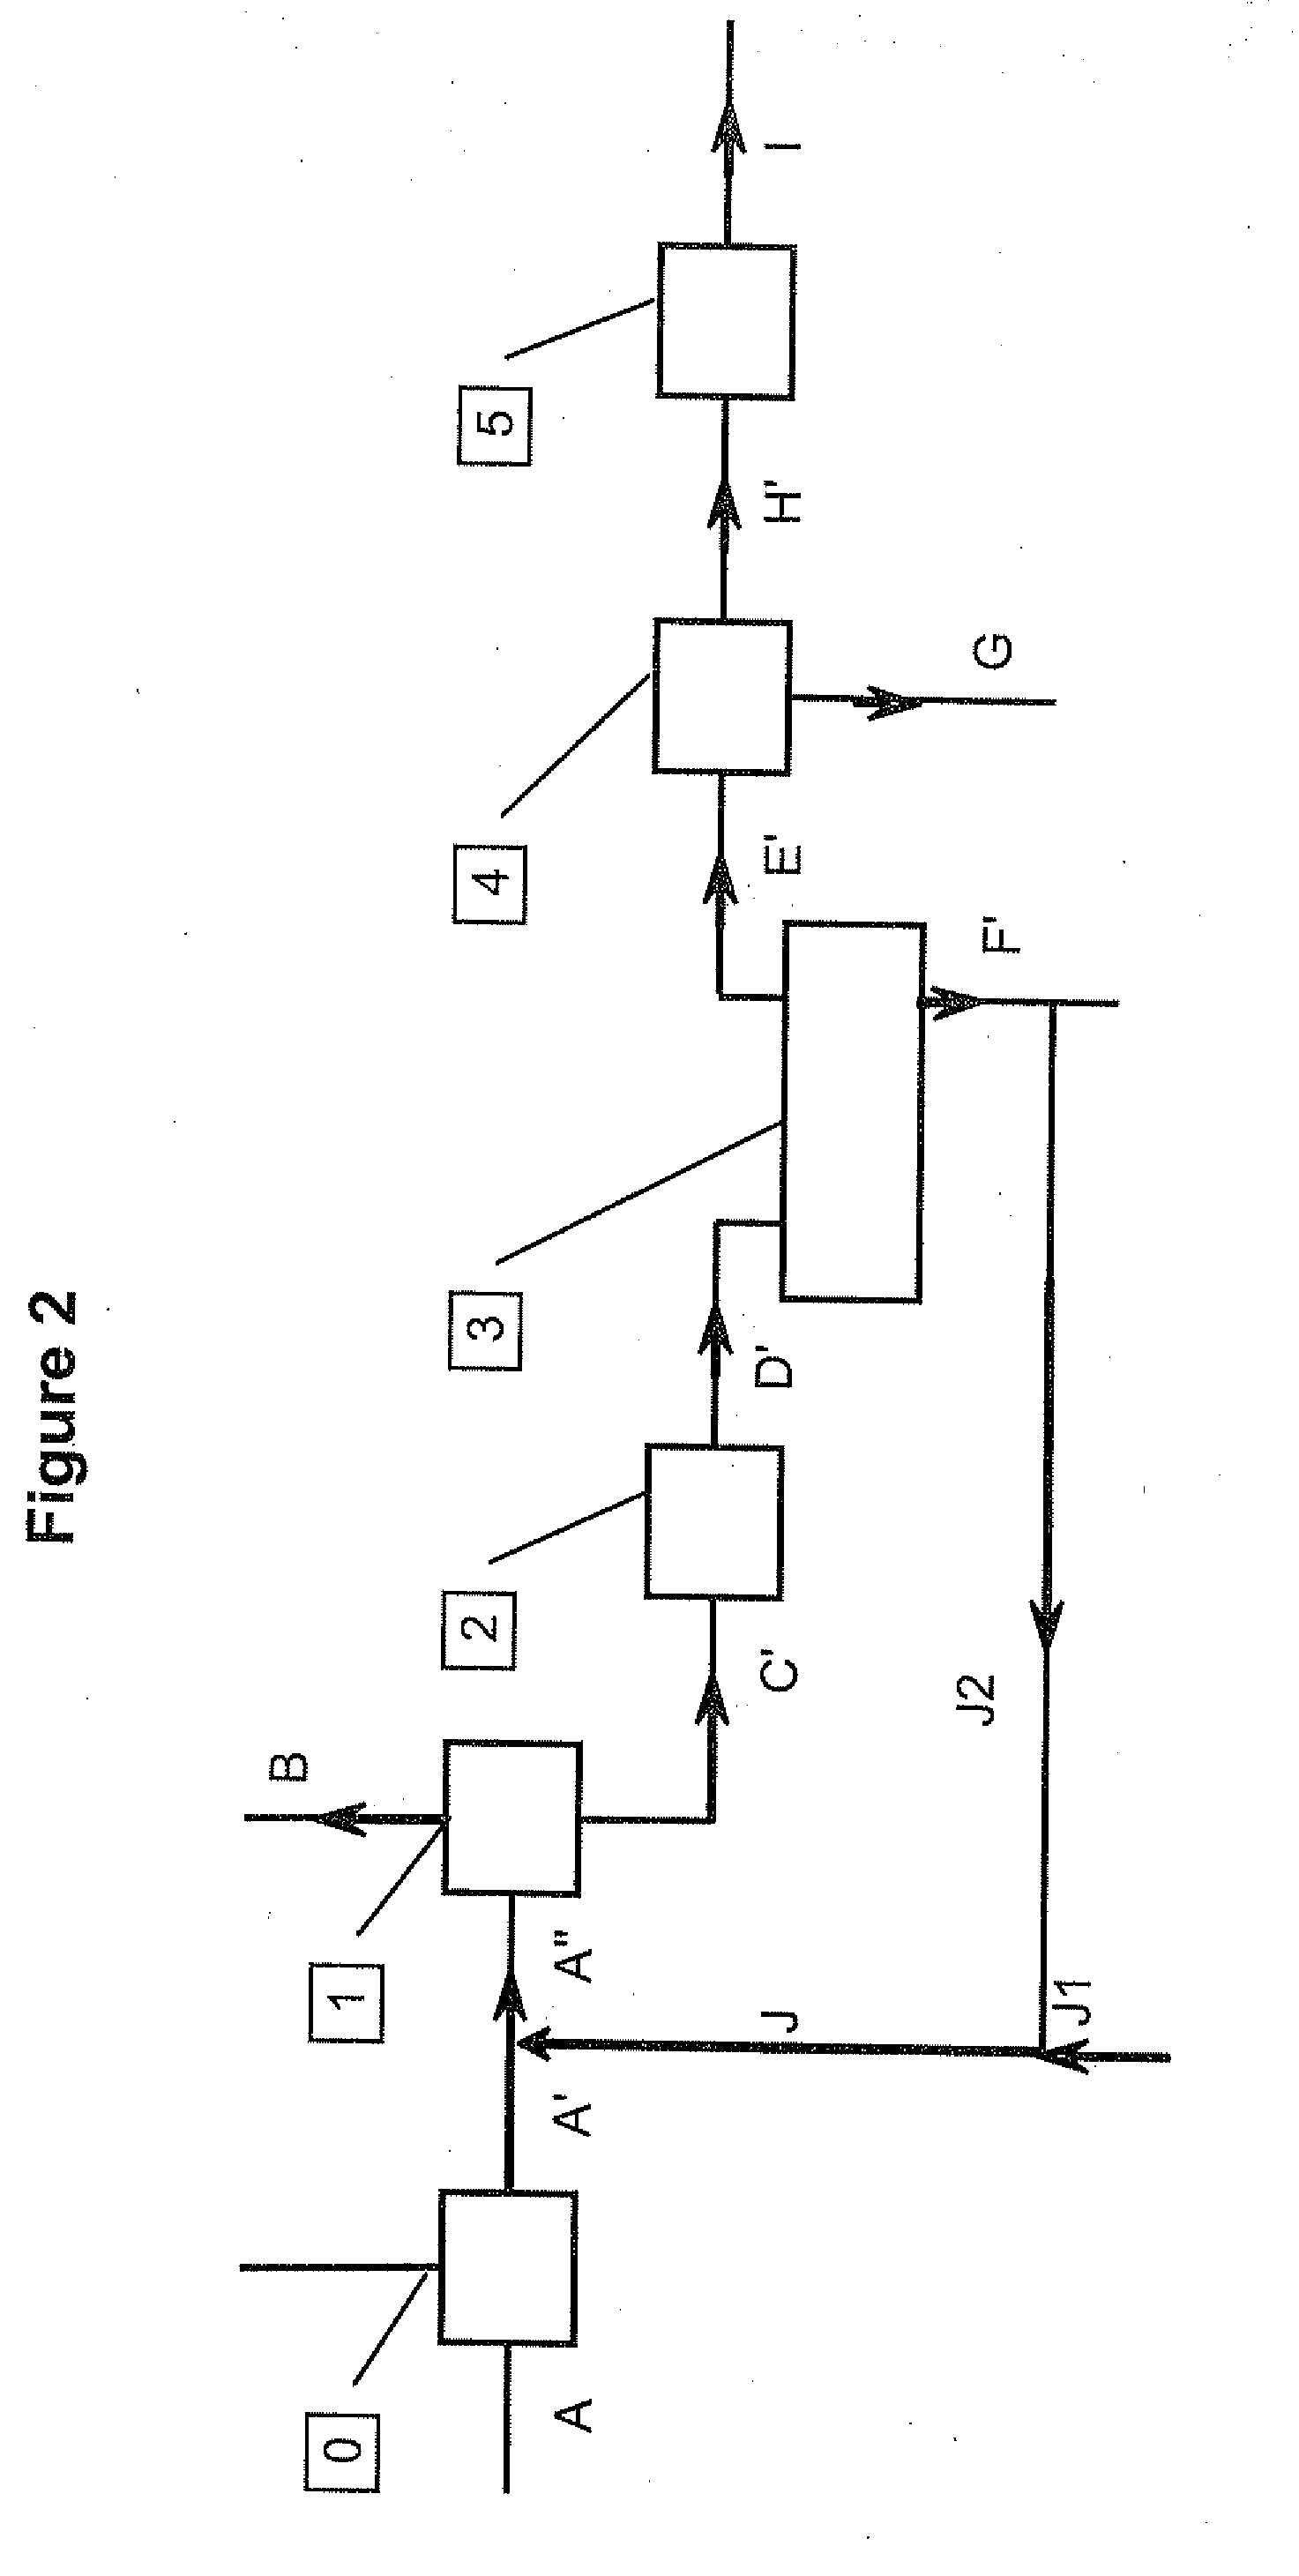 Separation improvement in a method of producing alkyl esters from vegetable or animal oil and an aliphatic monoalcohol